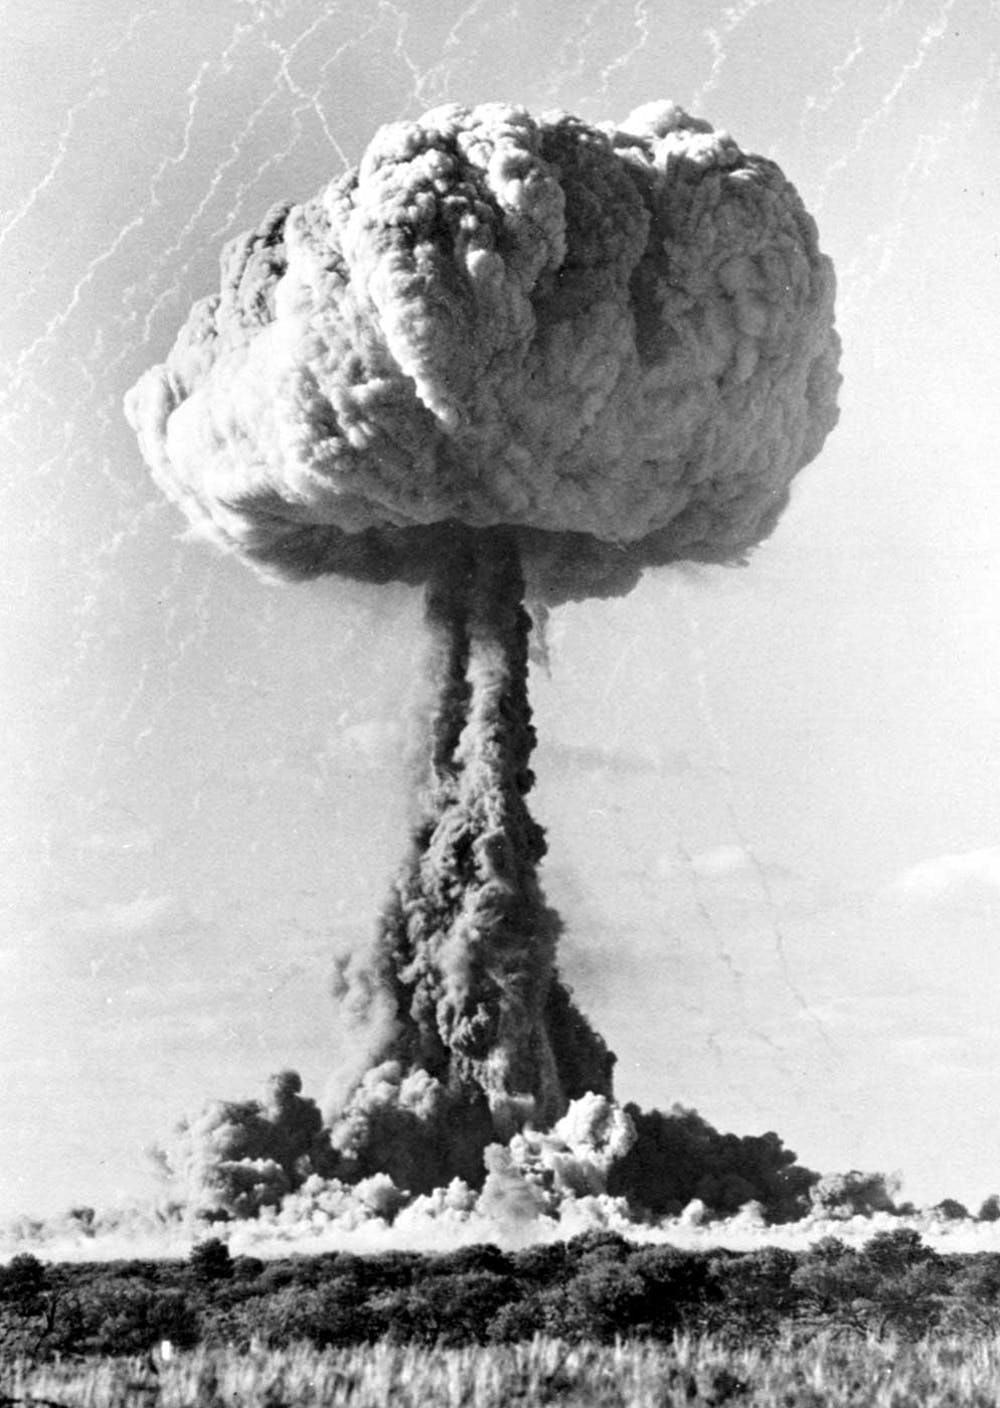 British nuclear tests left behind a radioactive legacy. (National Archives of Australia)